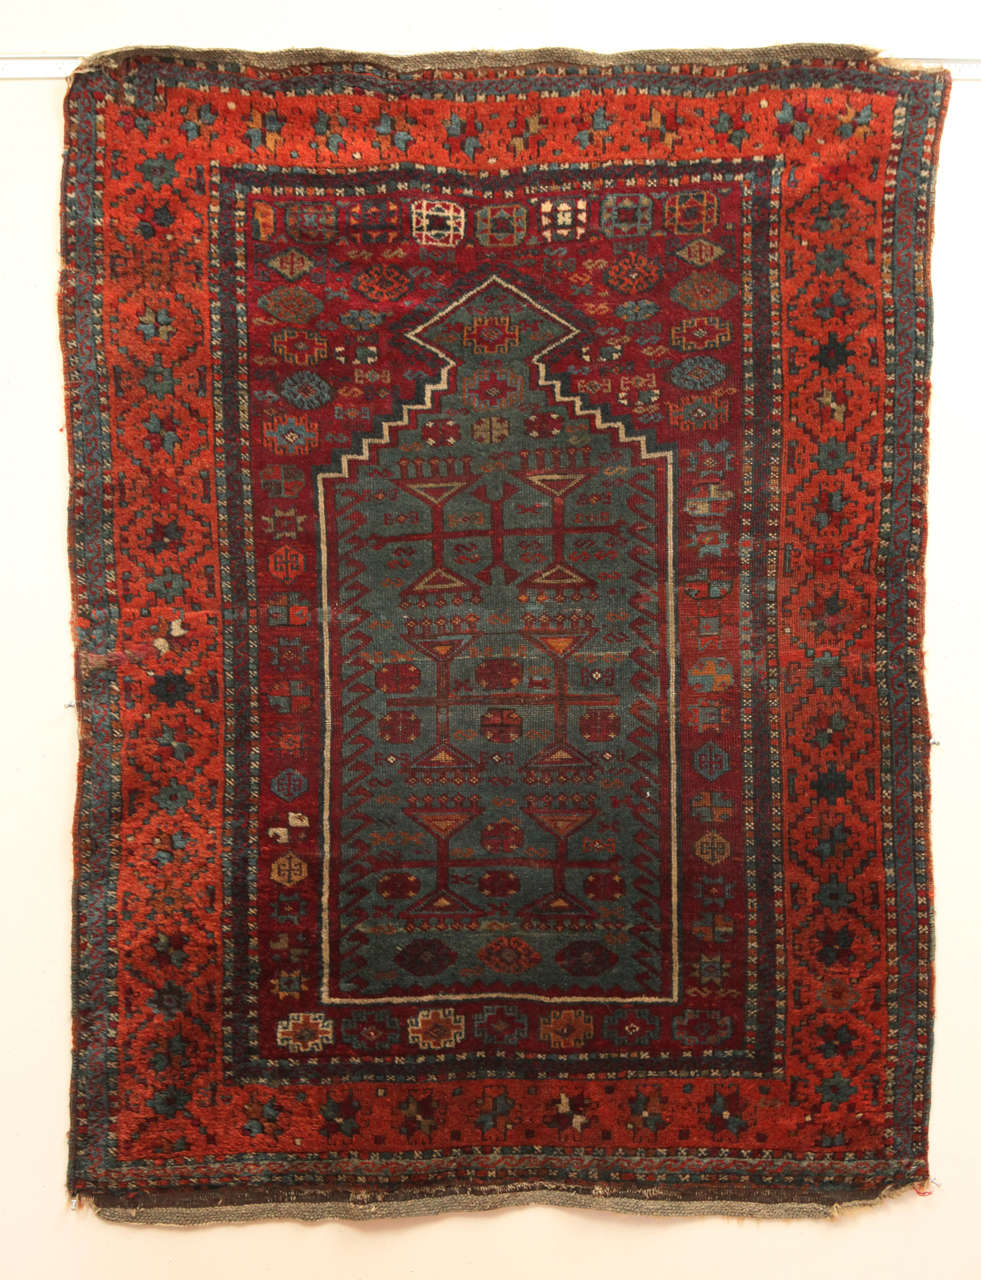 19th C. South East Anatolian village prayer rug.  Colors:  burnt orange, teal blue, wine red, touches of yellow and ivory.